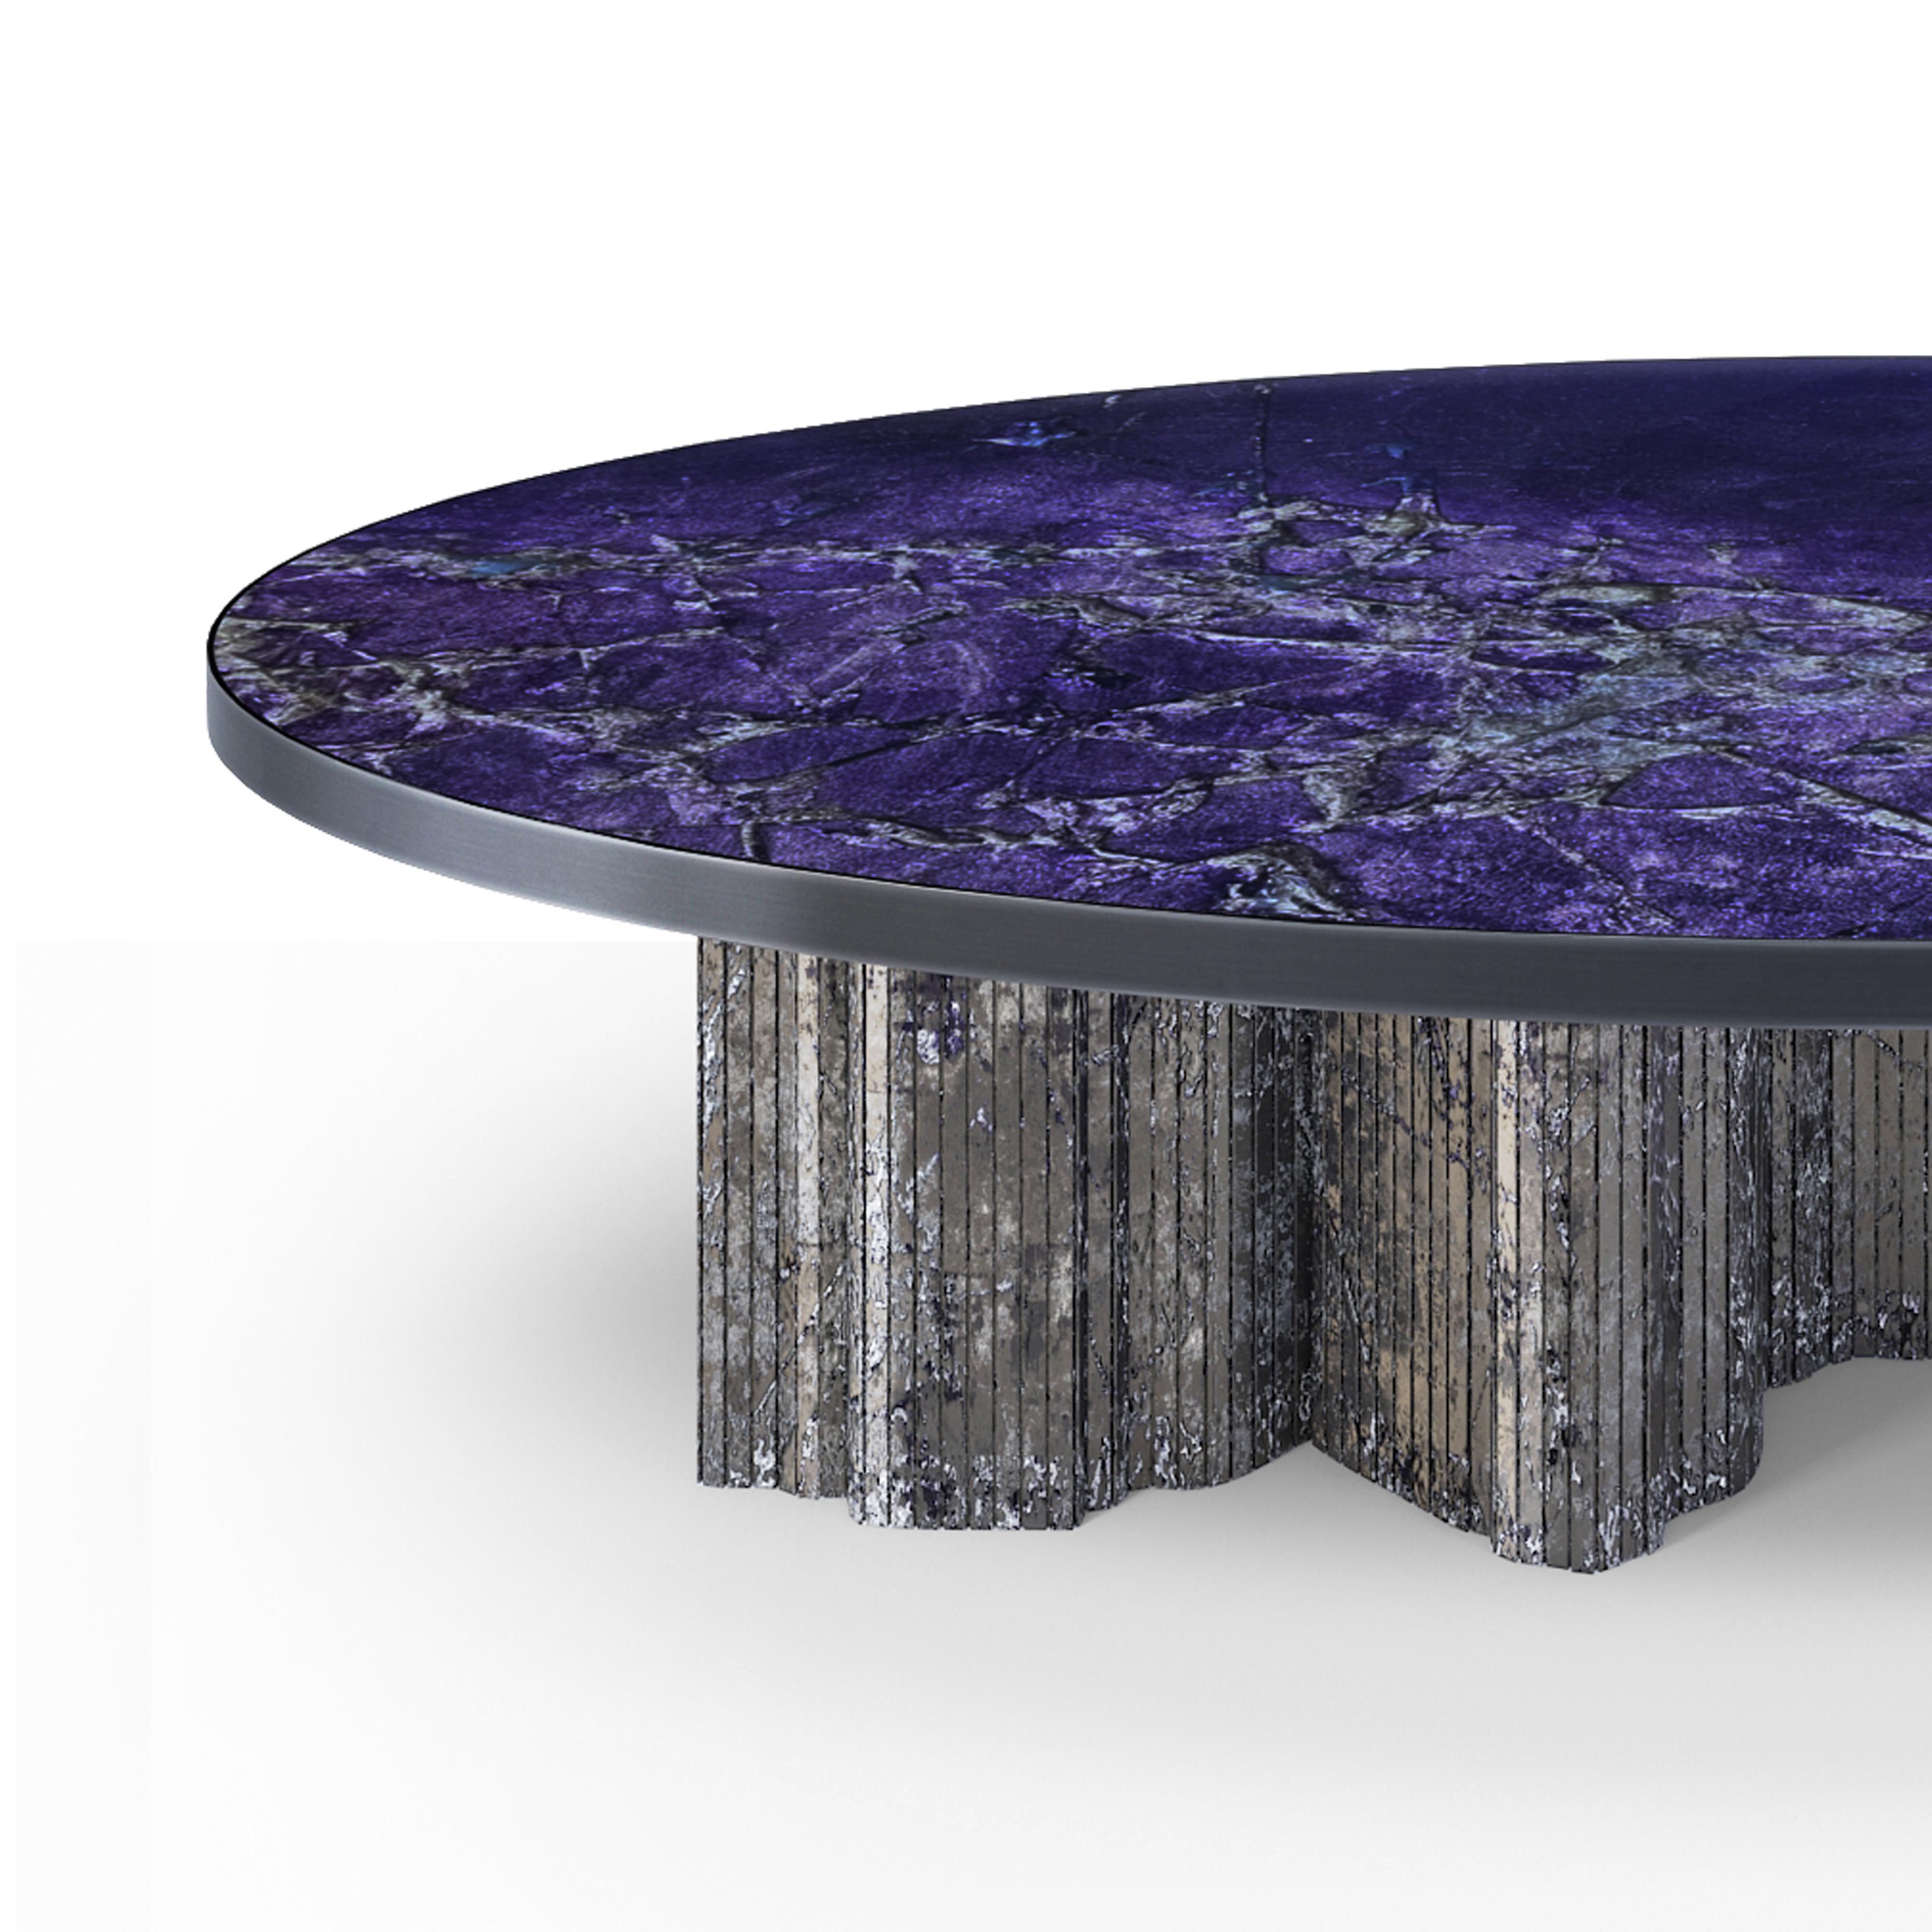 Lillian Gorbachincky's Limited edition Apollo dining table featuring signature art glass and bronze designed and fabricated by Lillian Gorbachincky Atelier.

Overall dimensions: 96